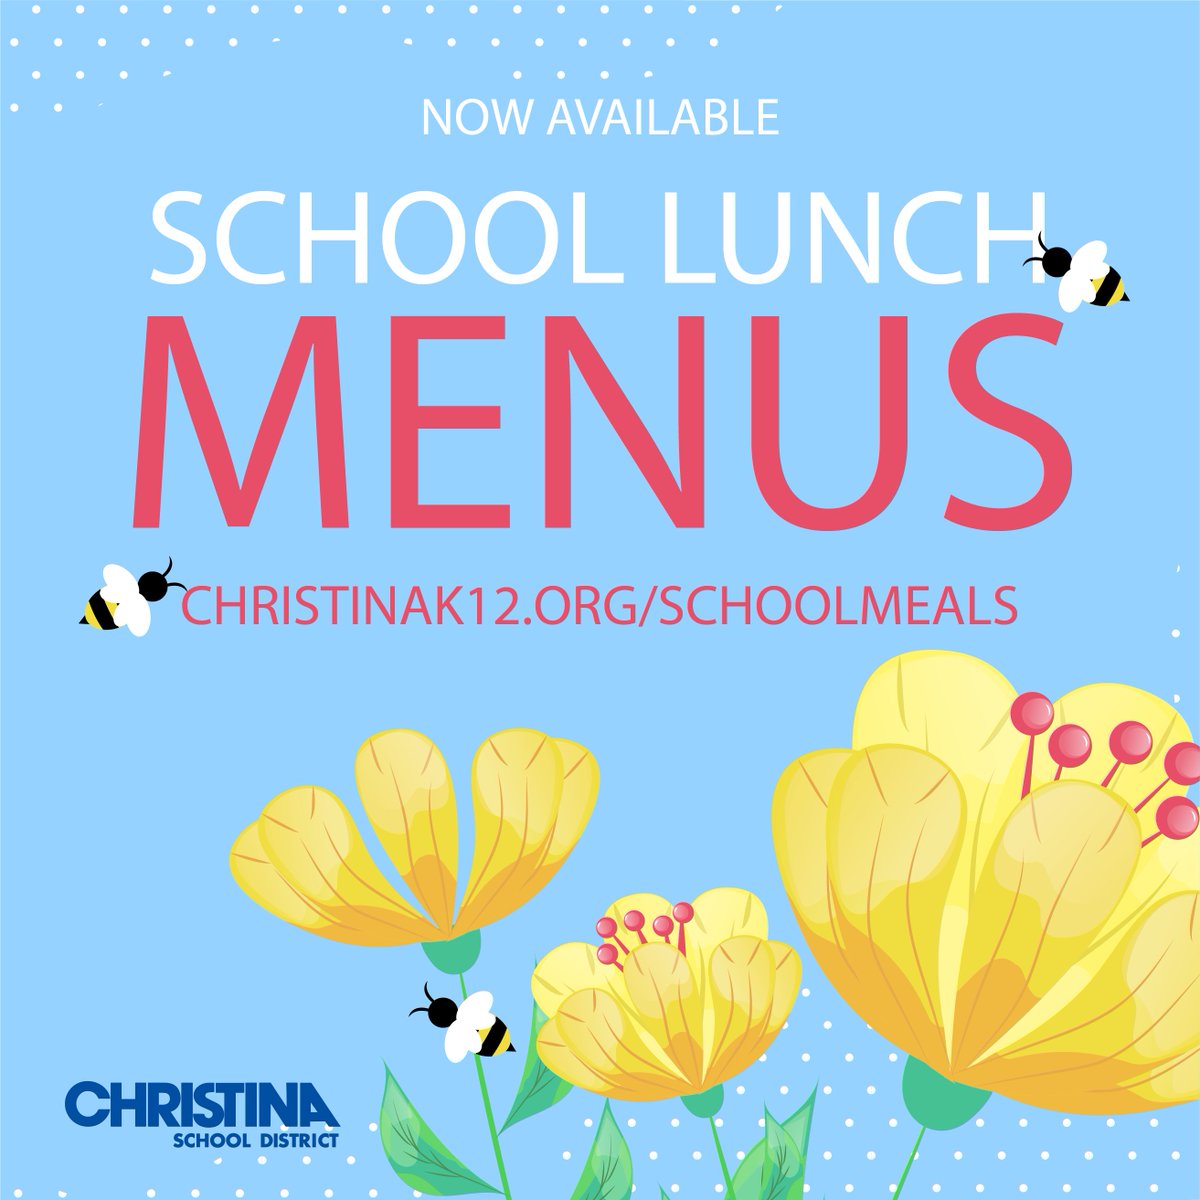 May meal menus are now available on our website at: christinak12.org/schoolmeals. Menus may change due to nationwide shortages. Please contact Child Nutrition Services if you have any questions.